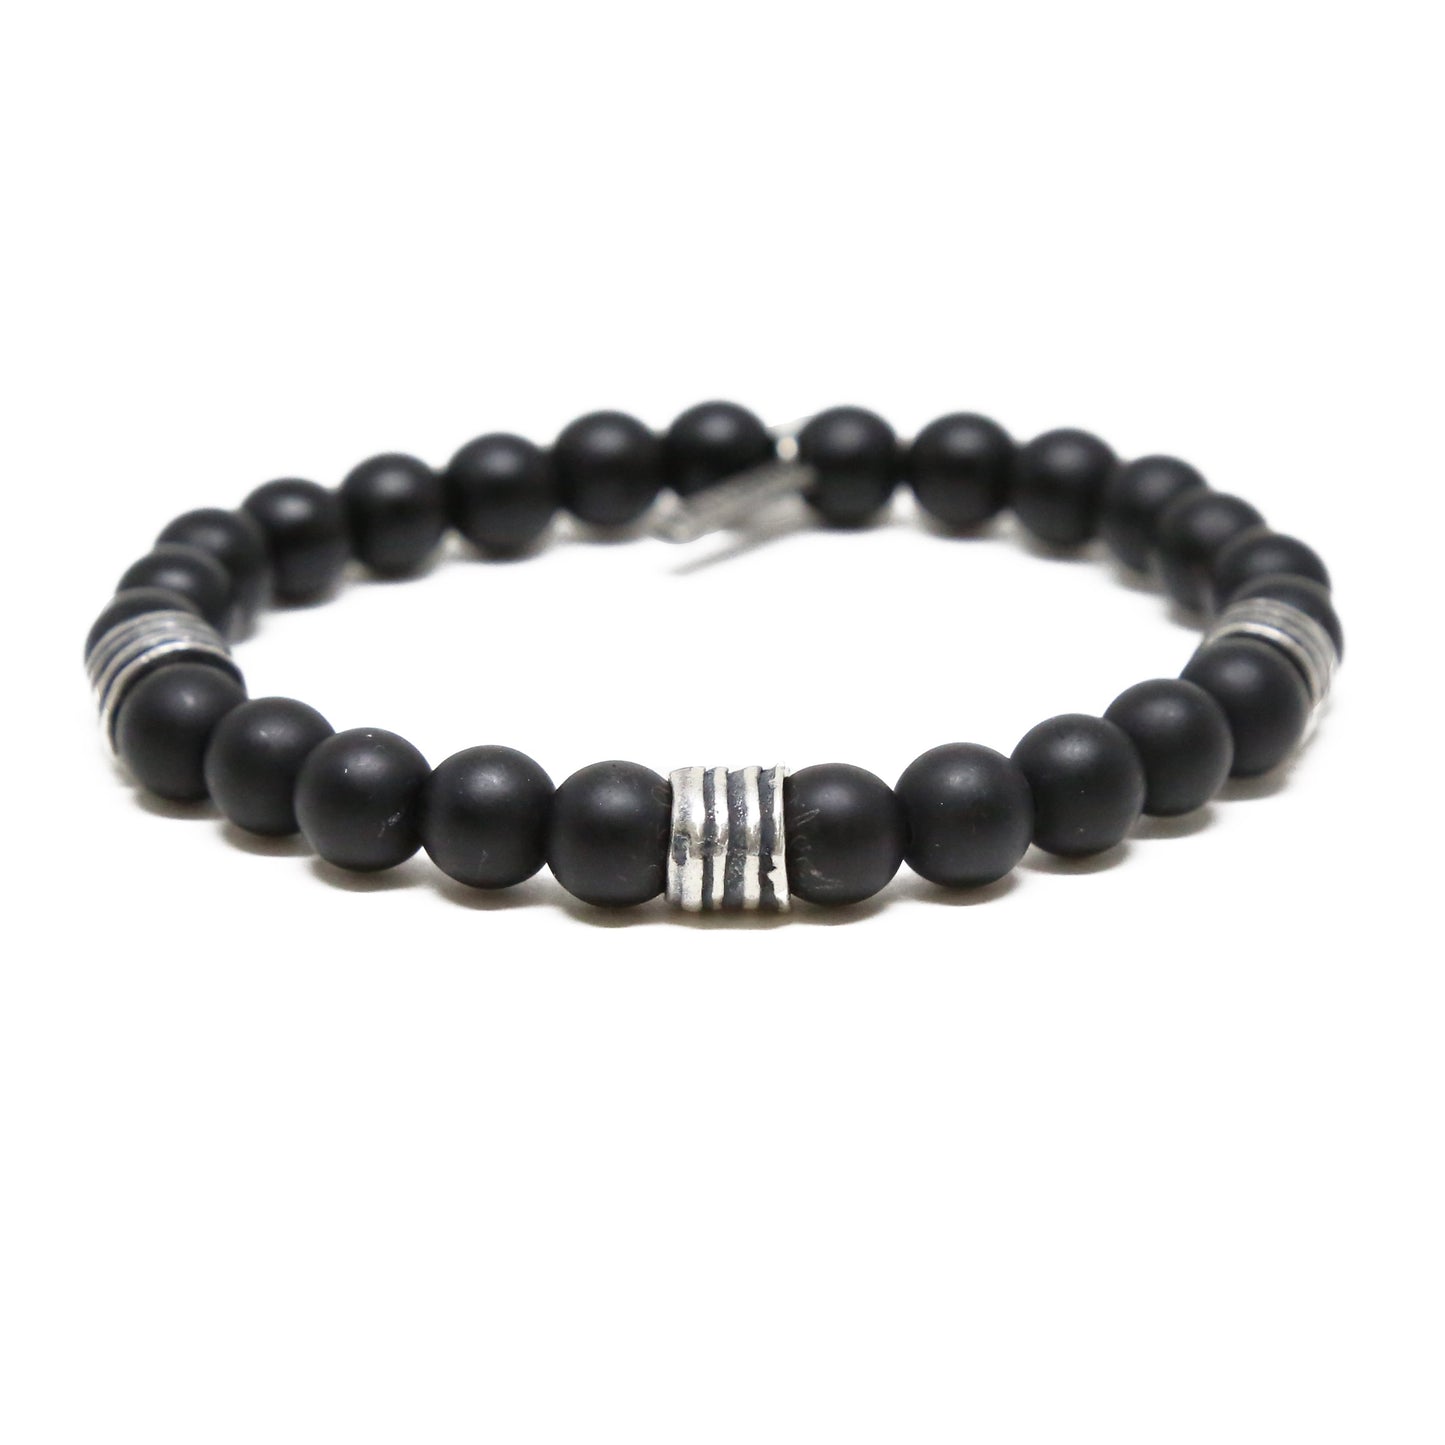 Back to Basics Bracelet in Black Agate and Silver Ox